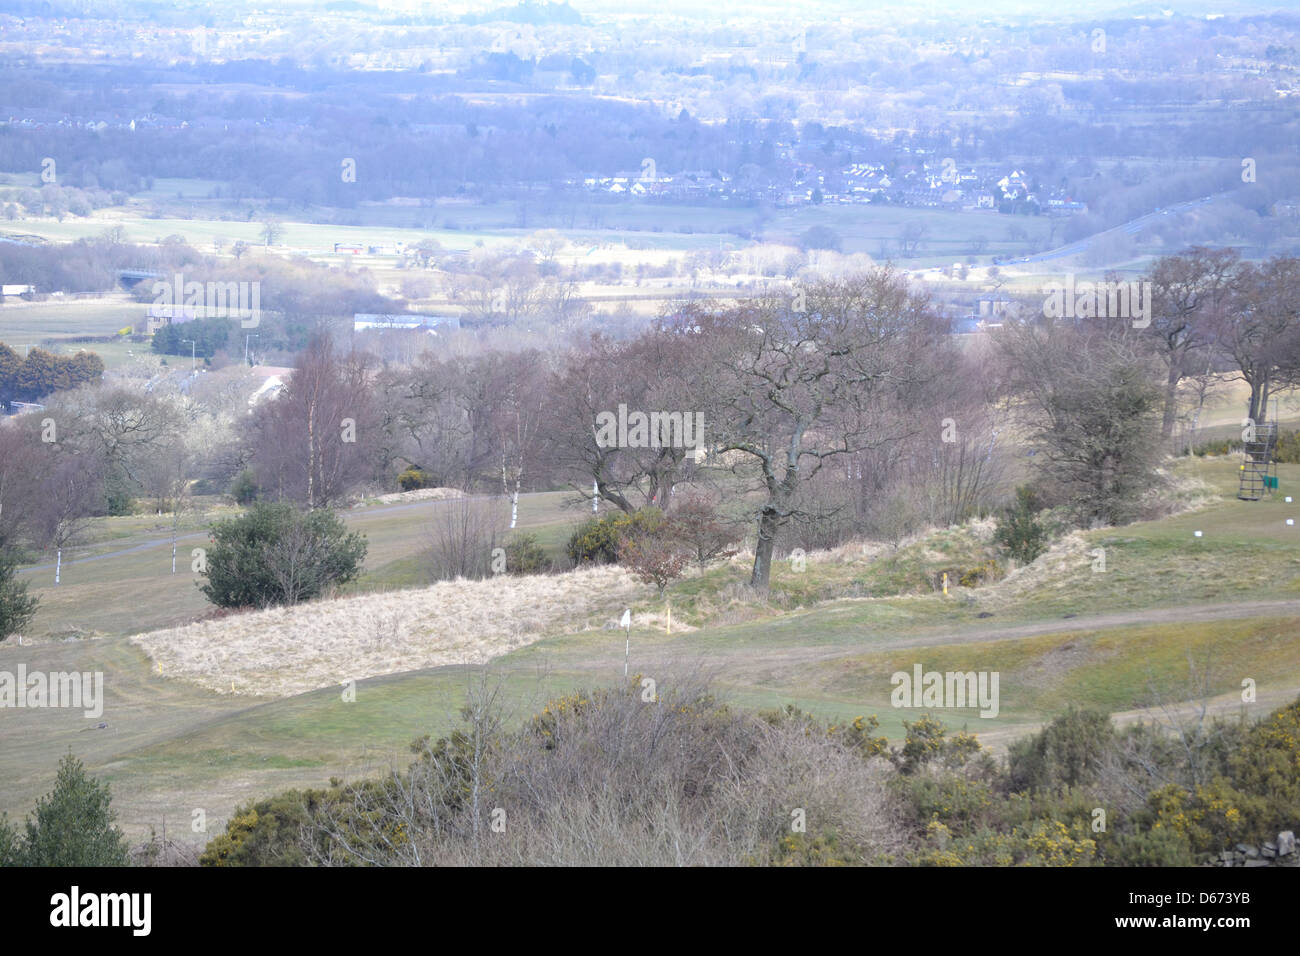 Ribble Valley - The ageless landscape of rural Lancashire, this area remains relatively unexplored. Stock Photo